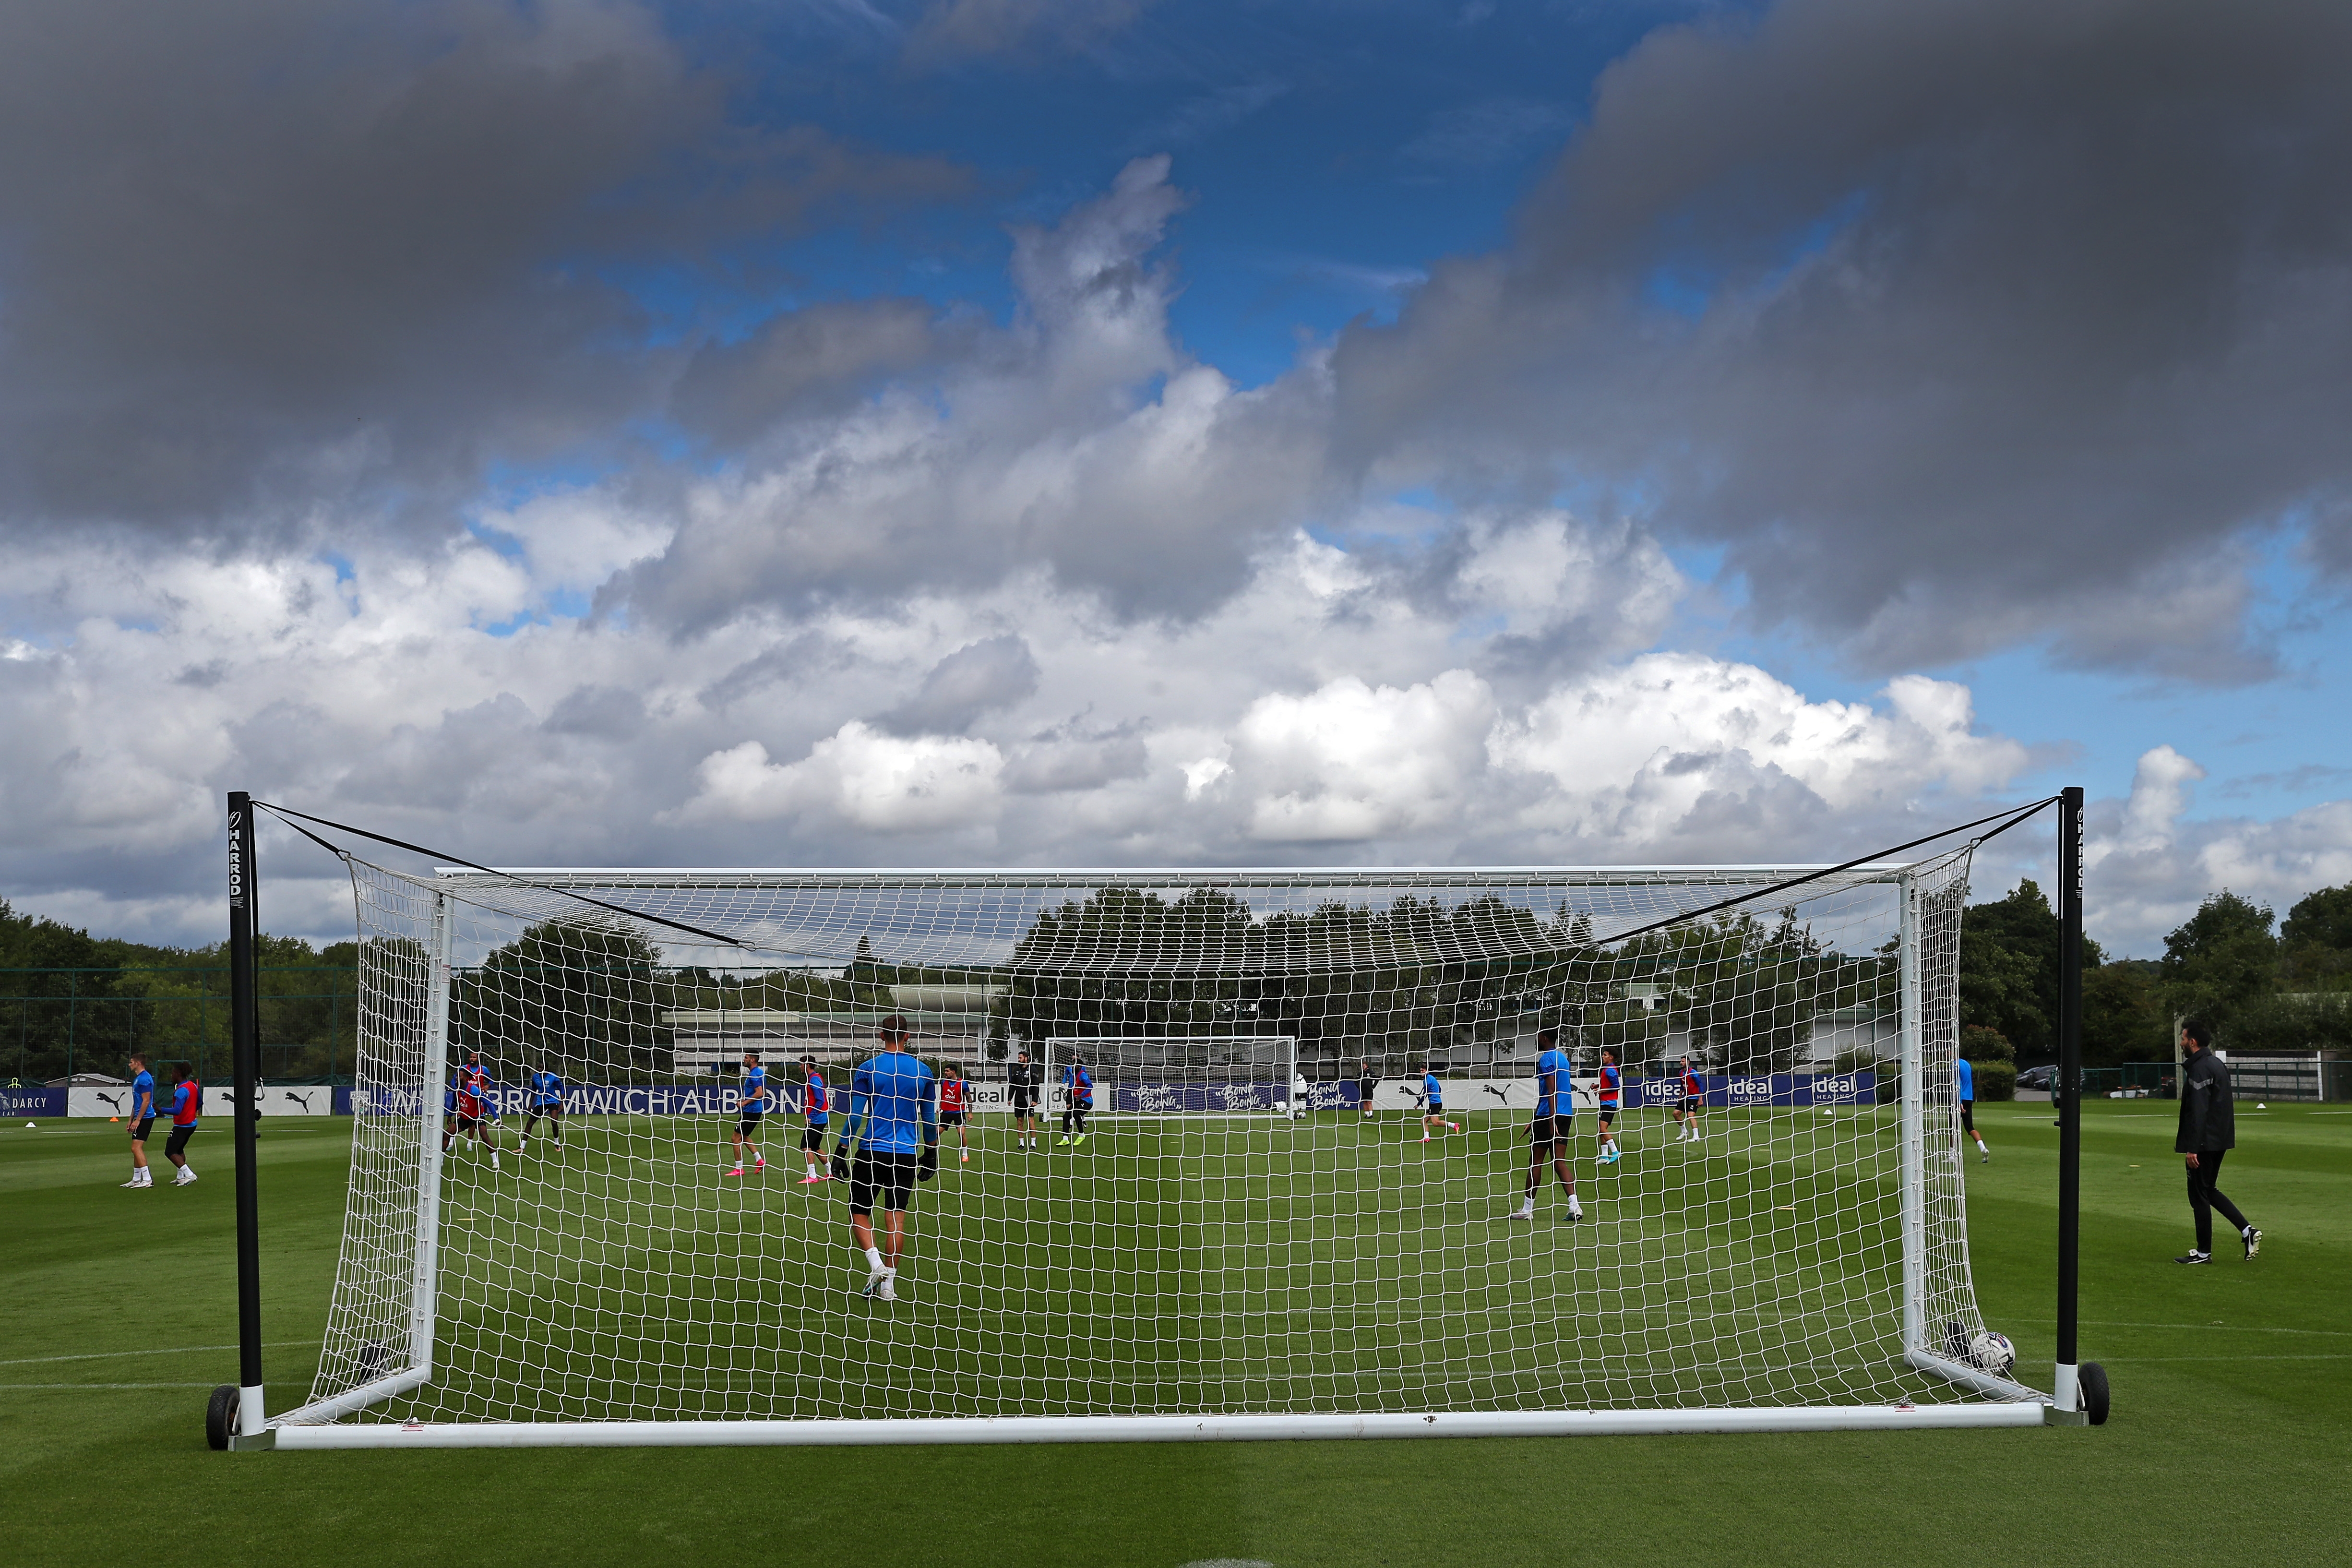 The training goal net with several Albion players behind it